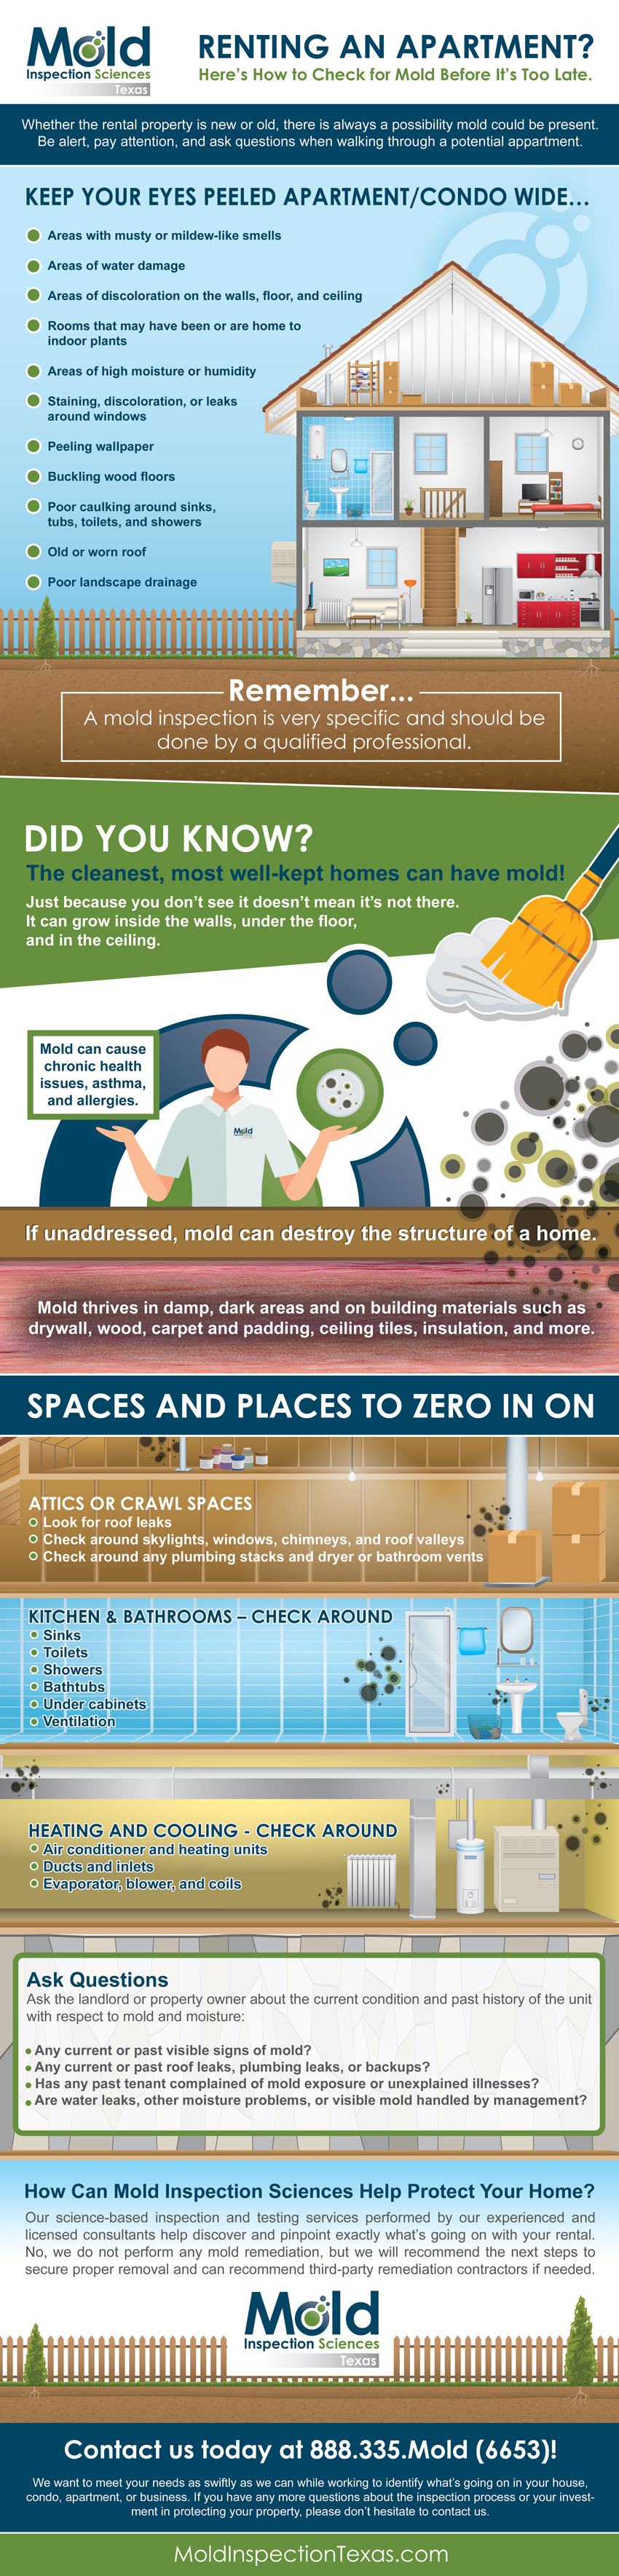 Renting an Apartment? Here’s How to Check for Mold Before It’s Too Late